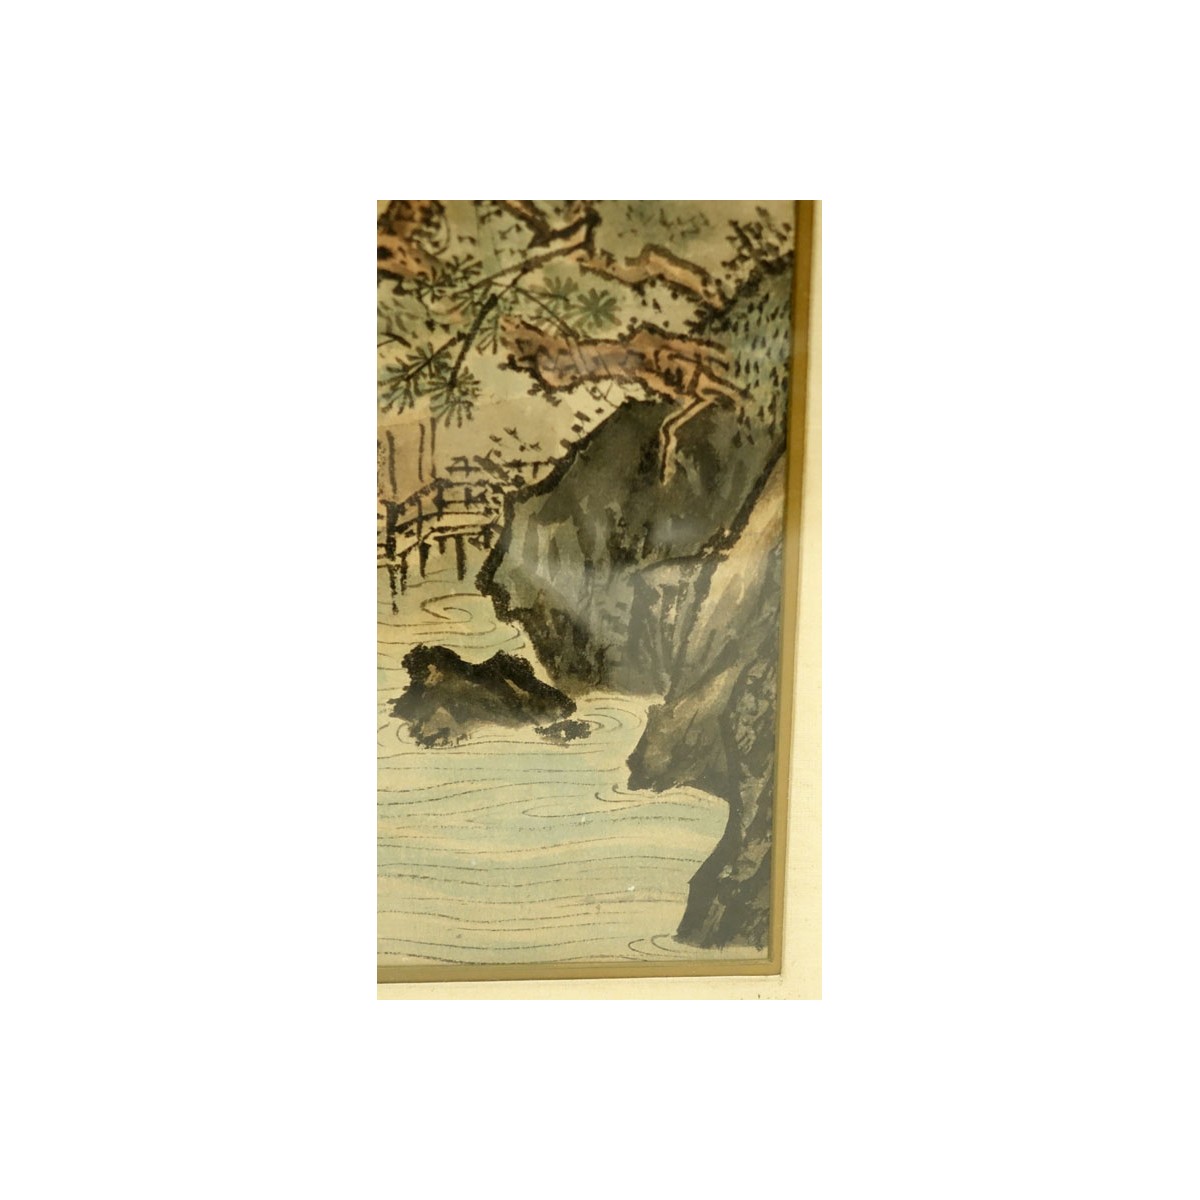 Large Antique Japanese Watercolor Scroll Painting, Landscape Scene. Toning and spotting, crease mar